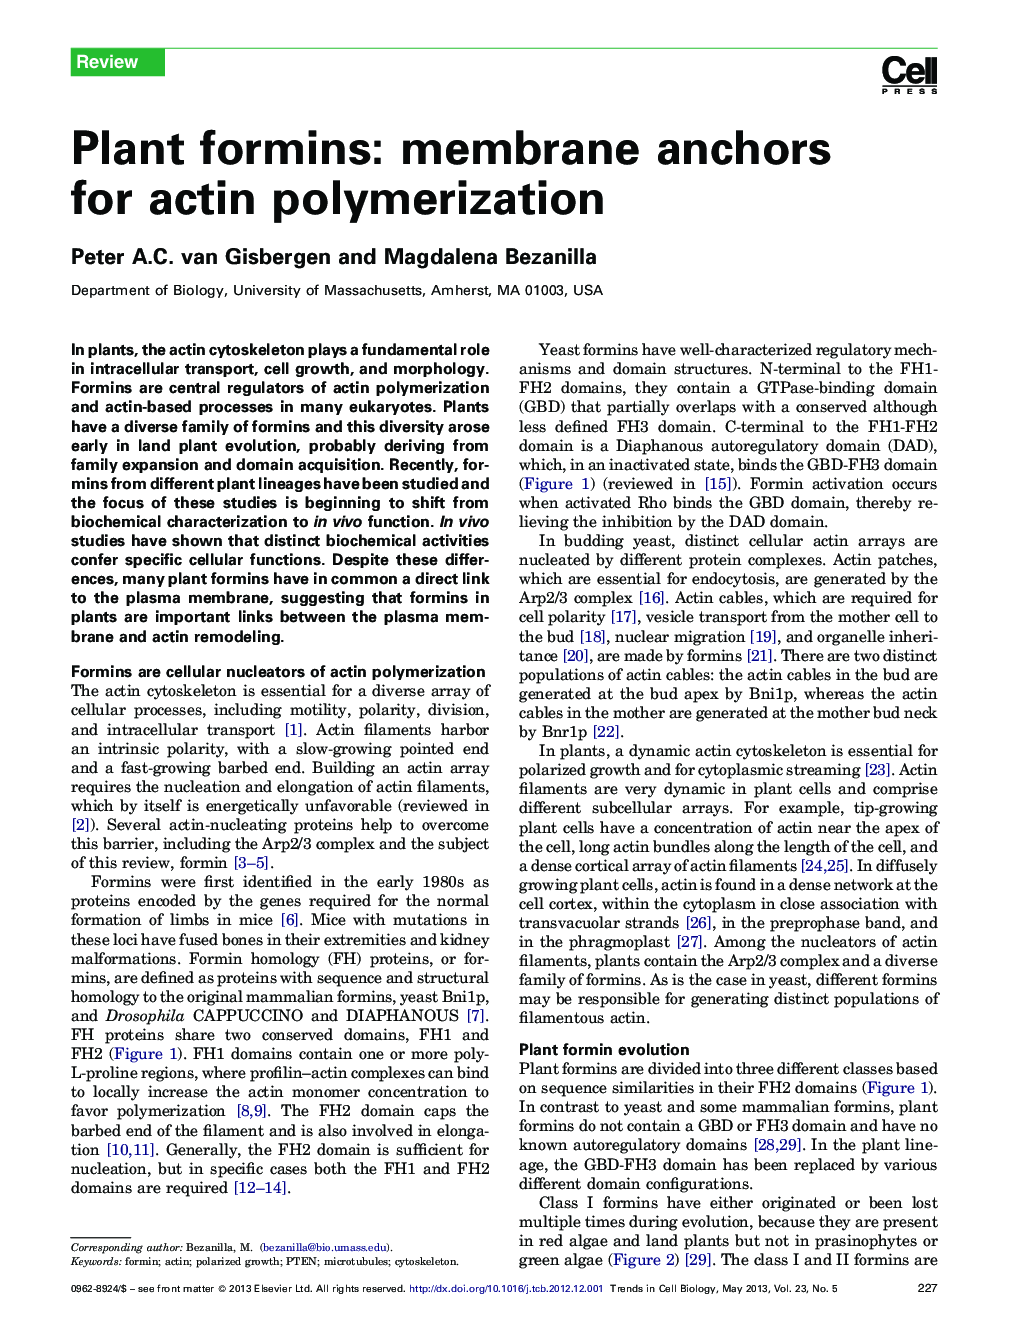 Plant formins: membrane anchors for actin polymerization